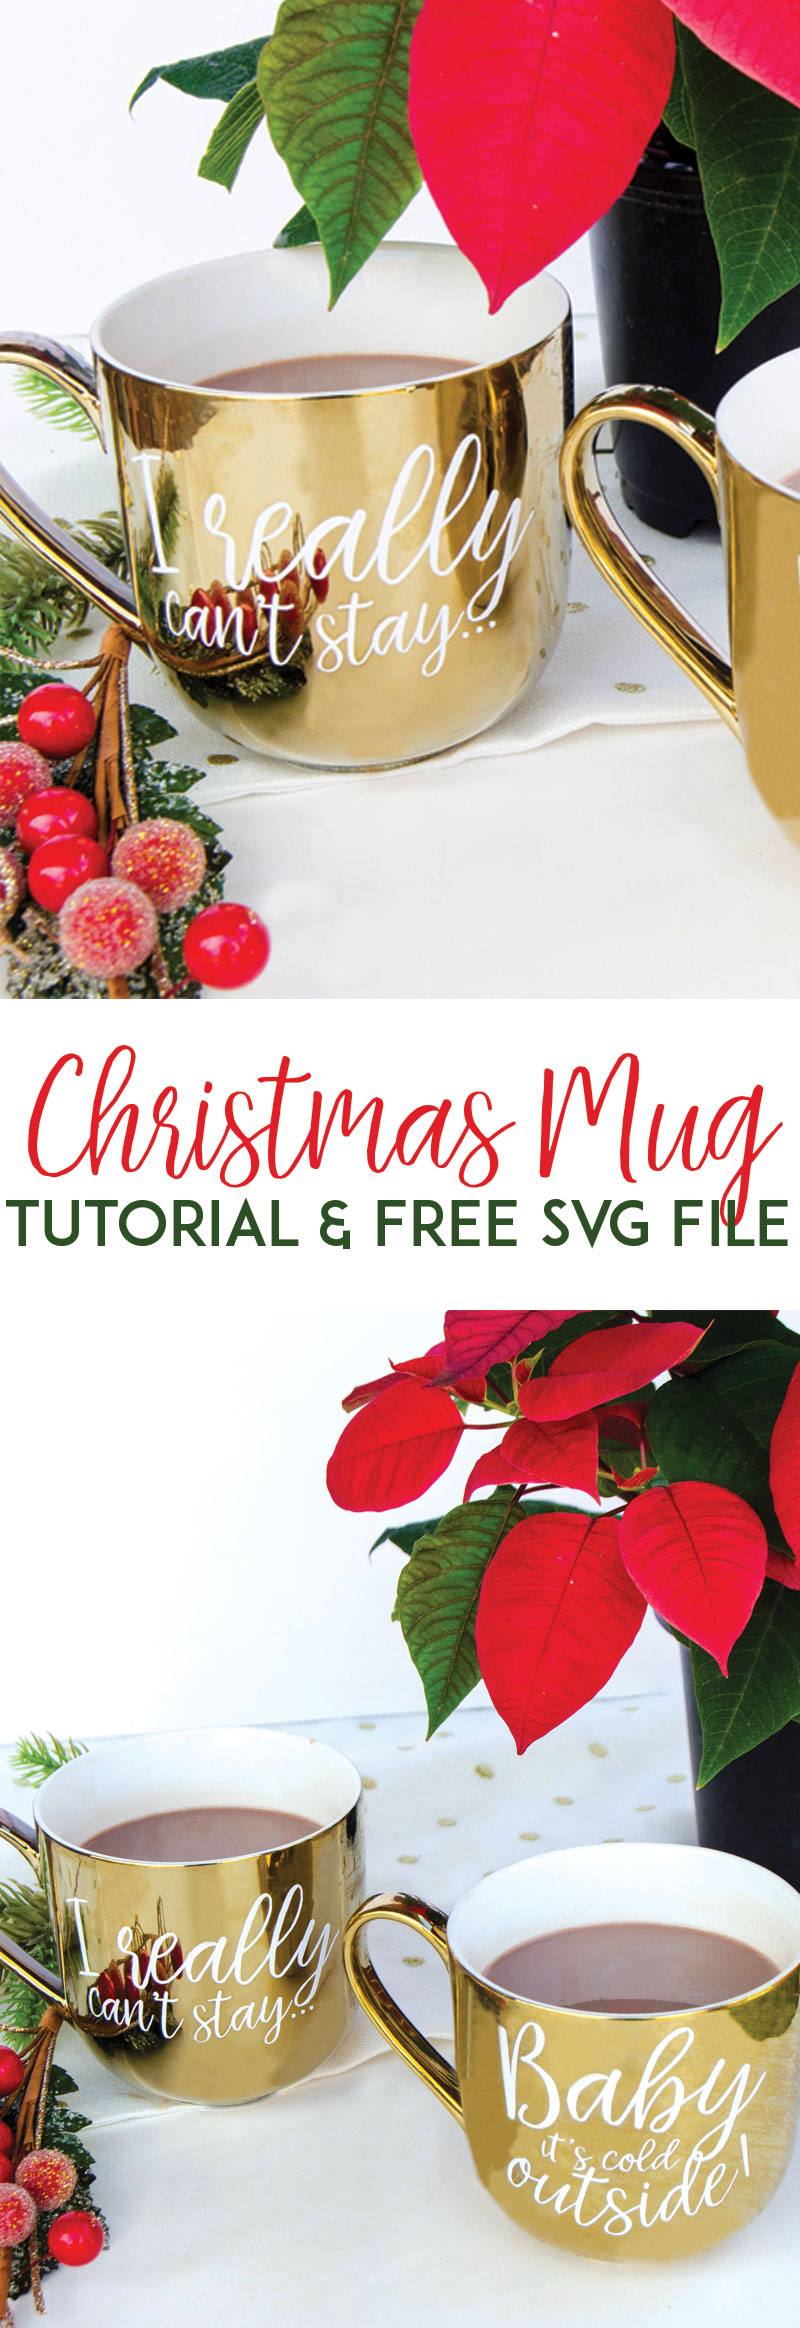 Christmas Mugs Tutorial by Lindi Haws of Love The Day